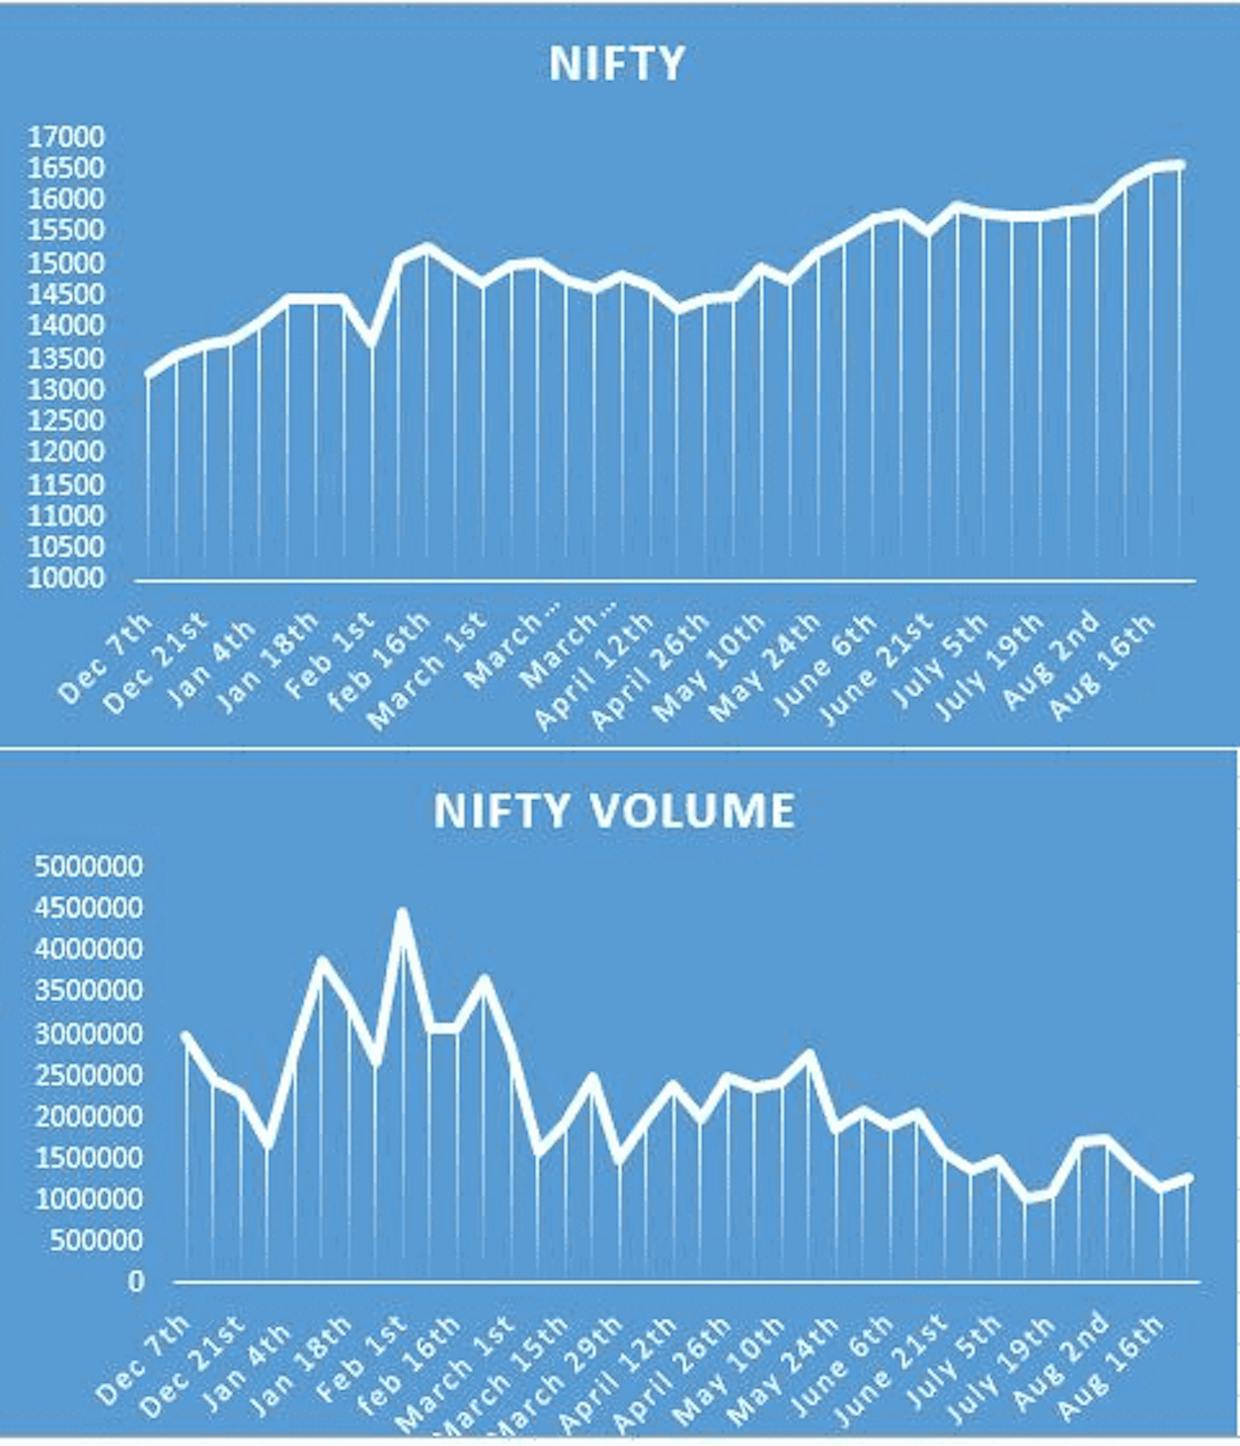 Nifty trend vs Nifty volumes